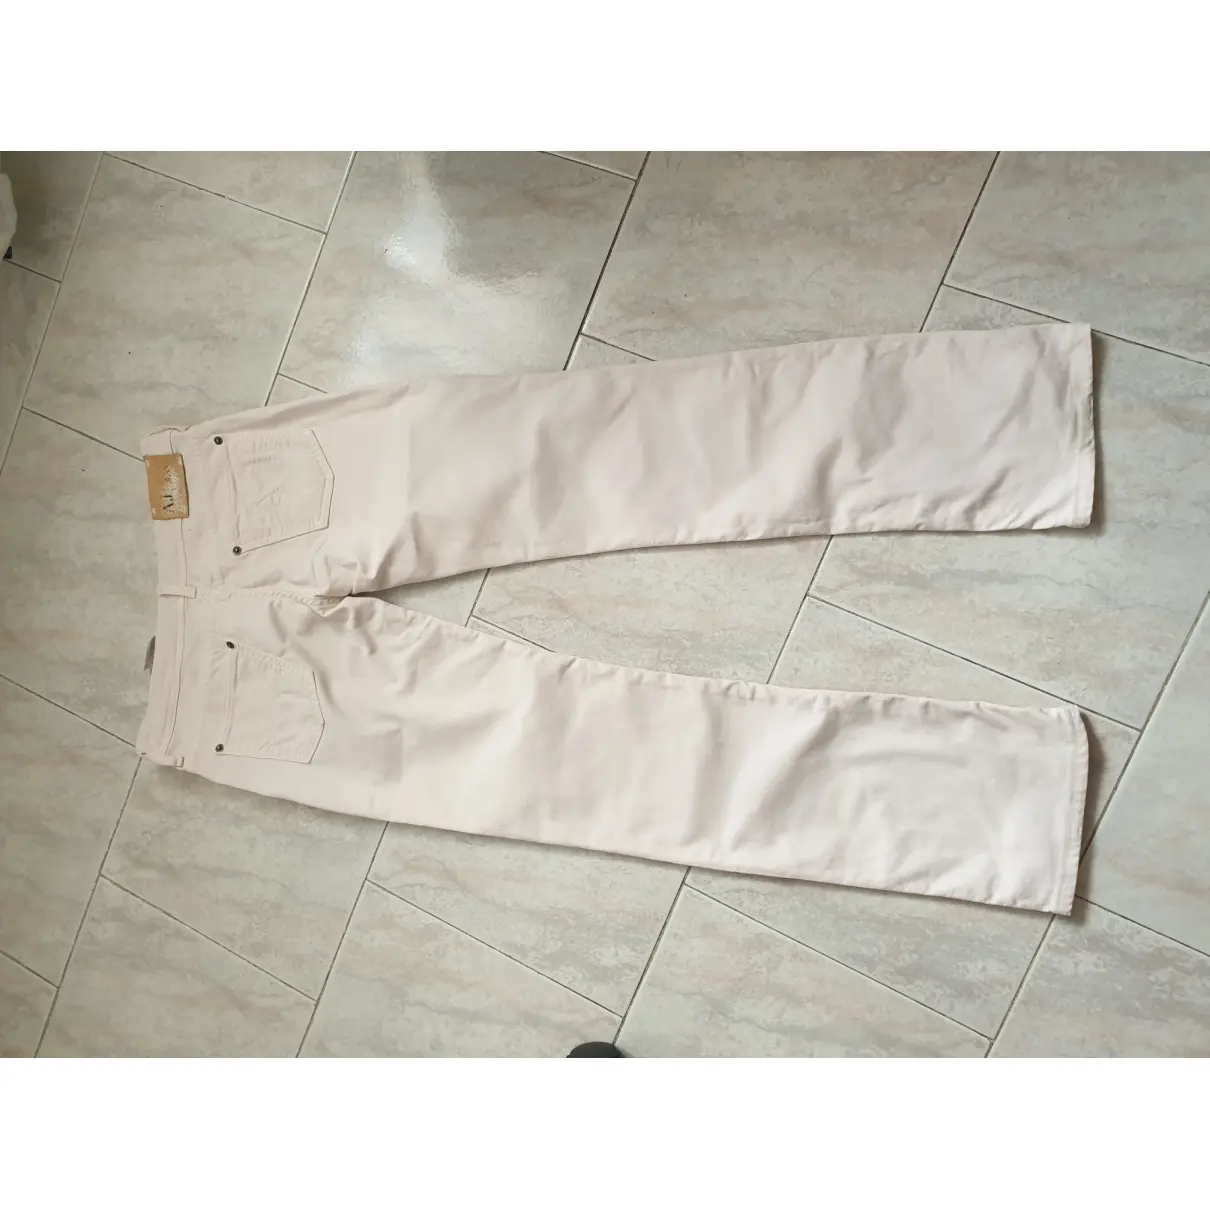 Armani Jeans Straight jeans for sale